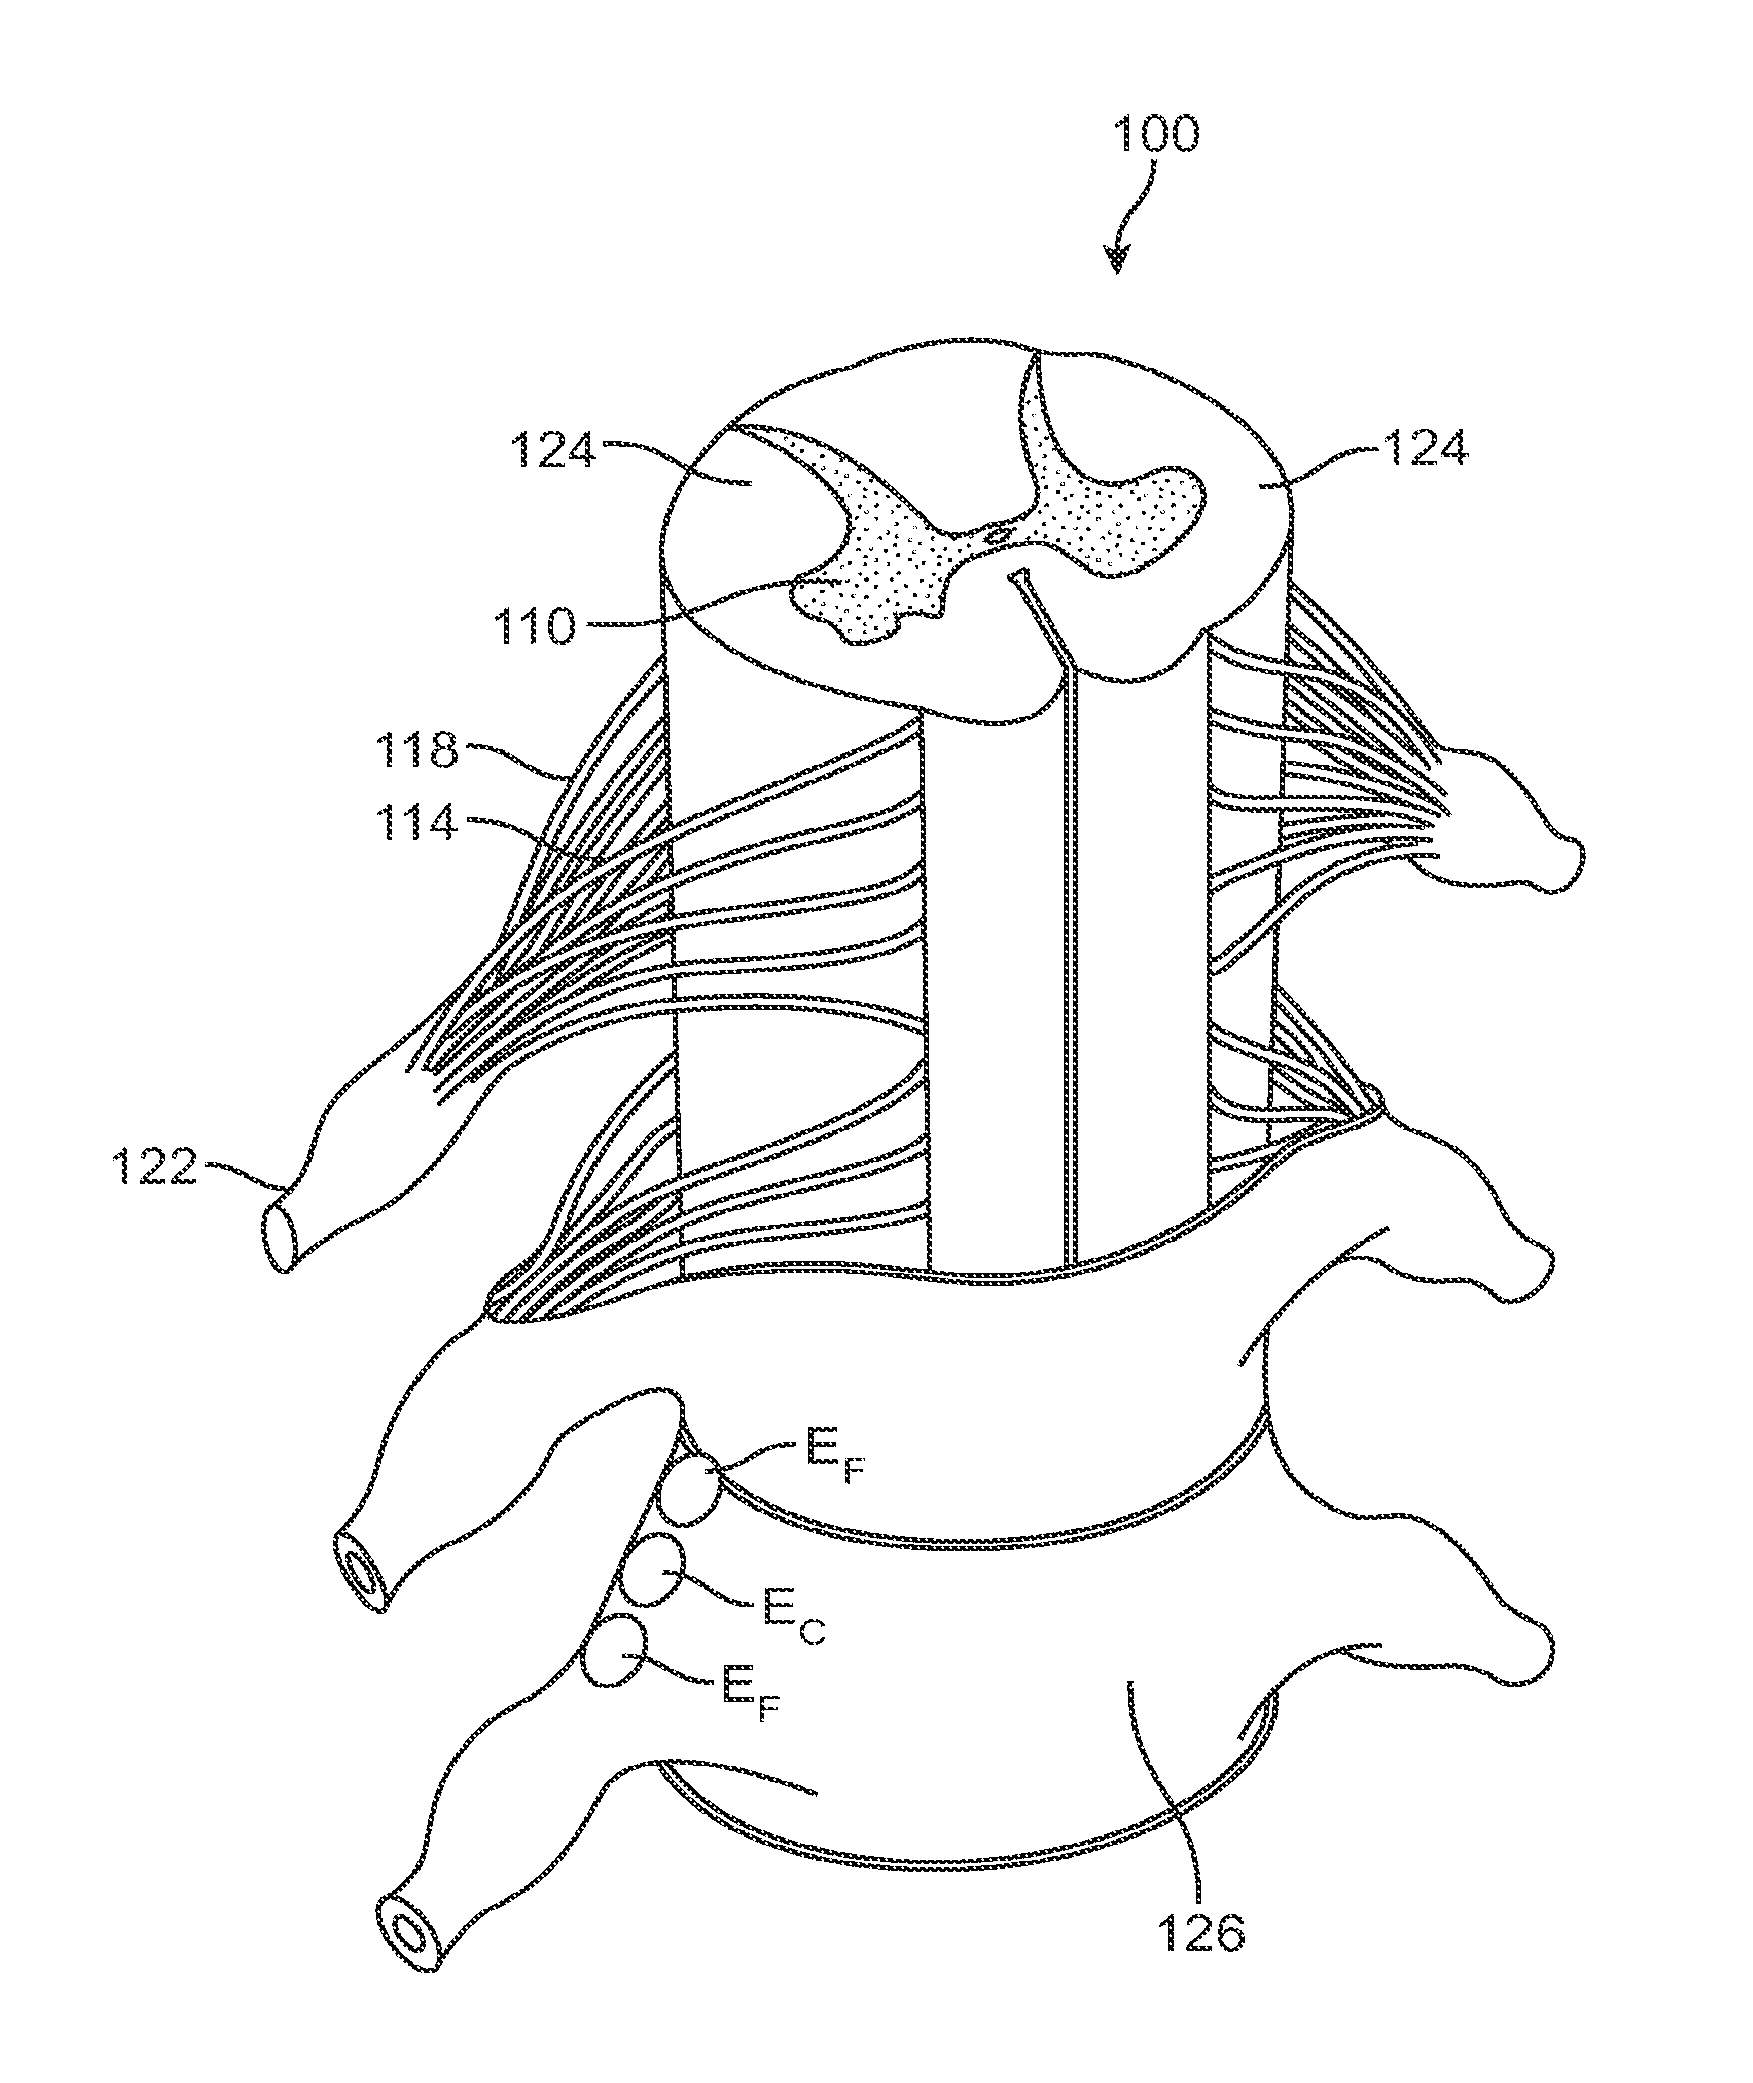 Methods and devices for treatment of non-neuropathic conditions using electrical stimulation